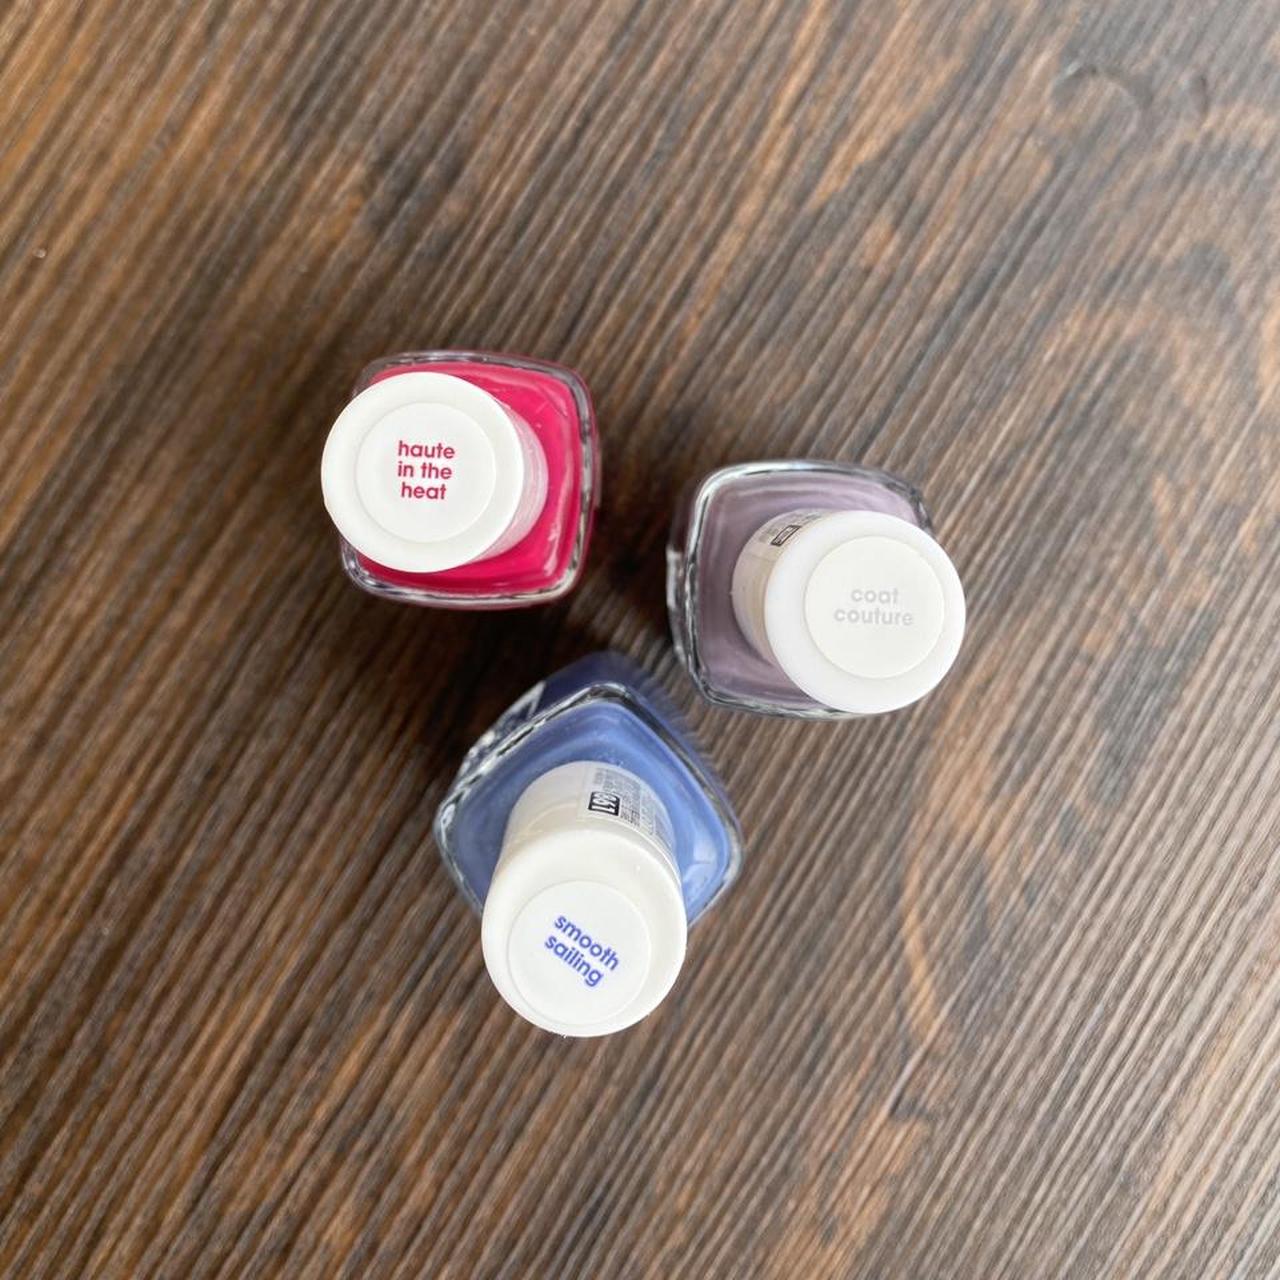 Product Image 2 - 3 essie nail polishes! these